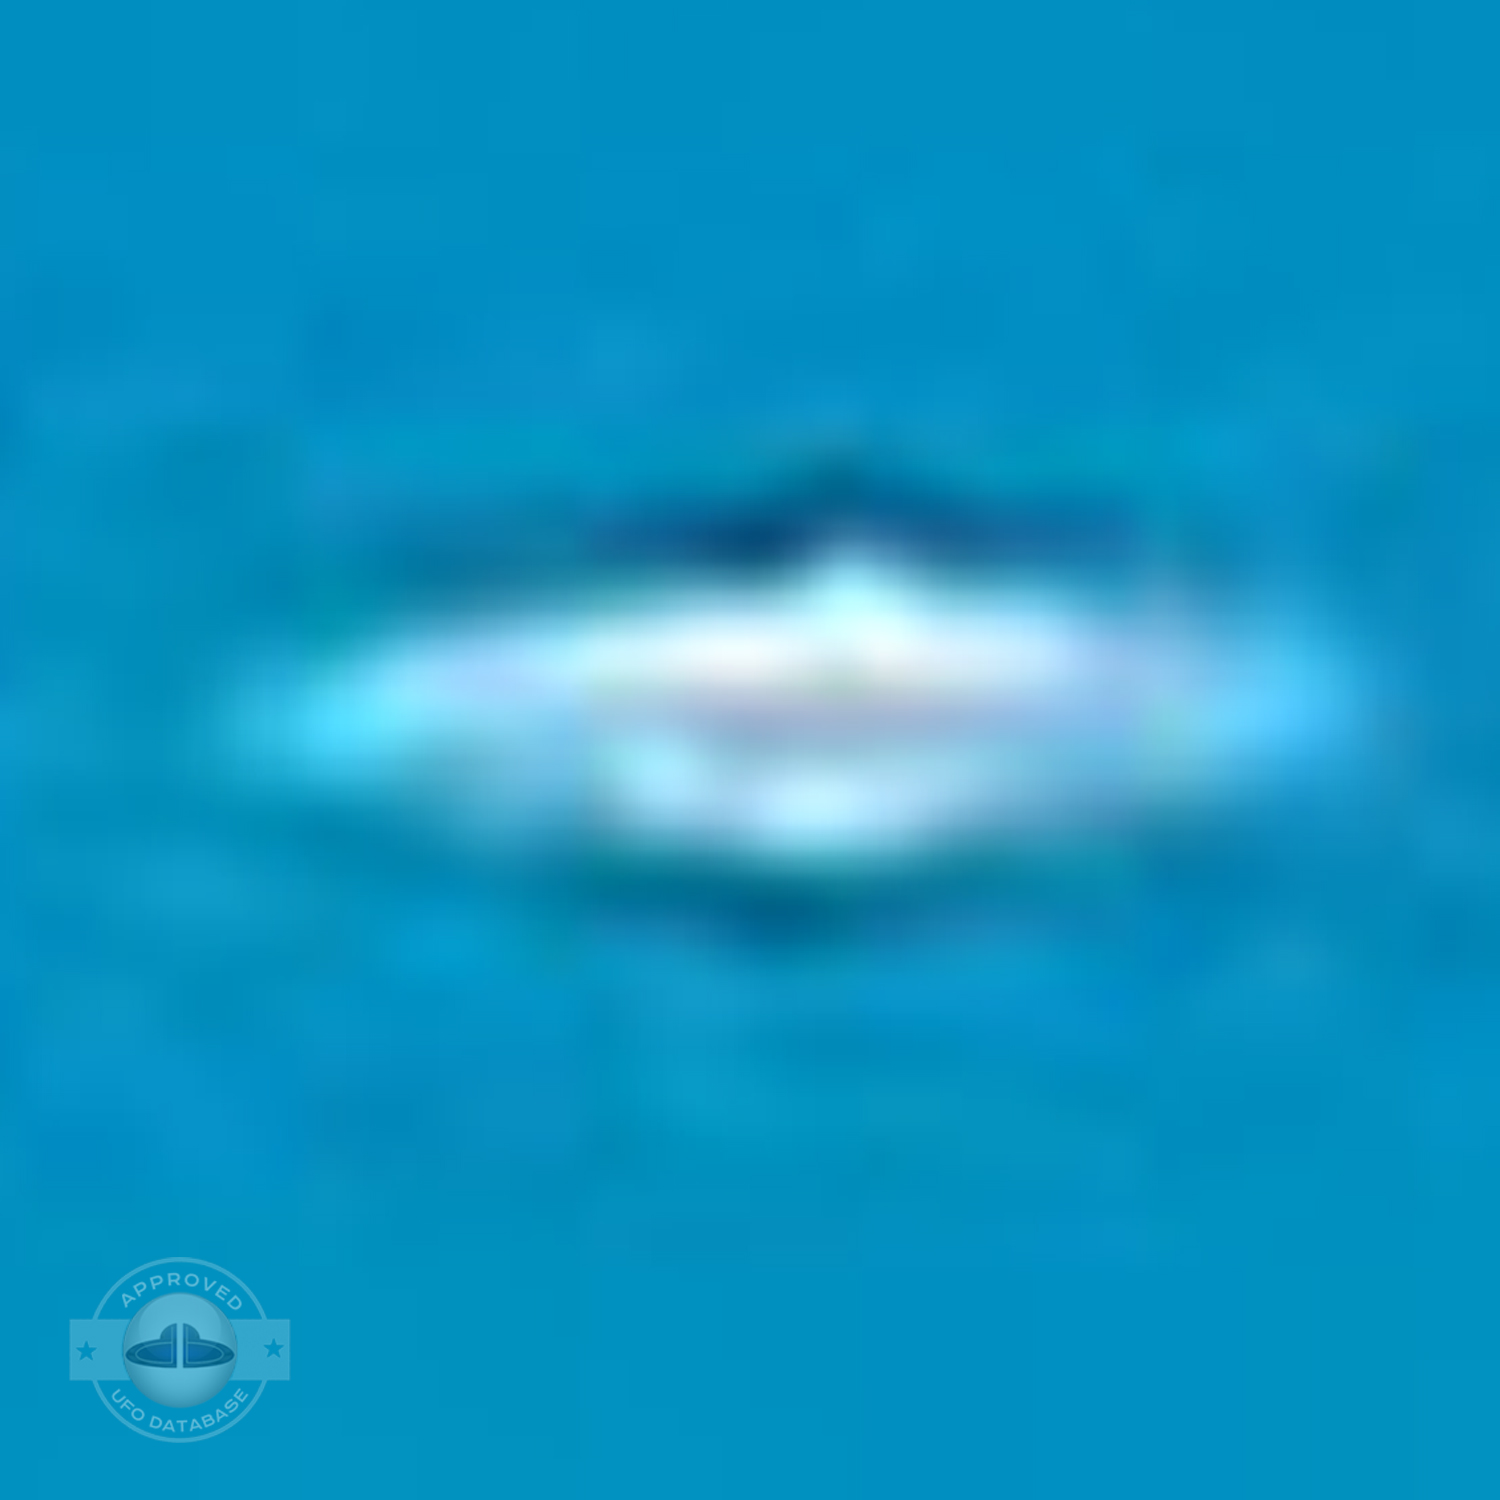 White UFO passing in cloudless turquoise sky over Sao Paulo Brazil UFO Picture #204-5